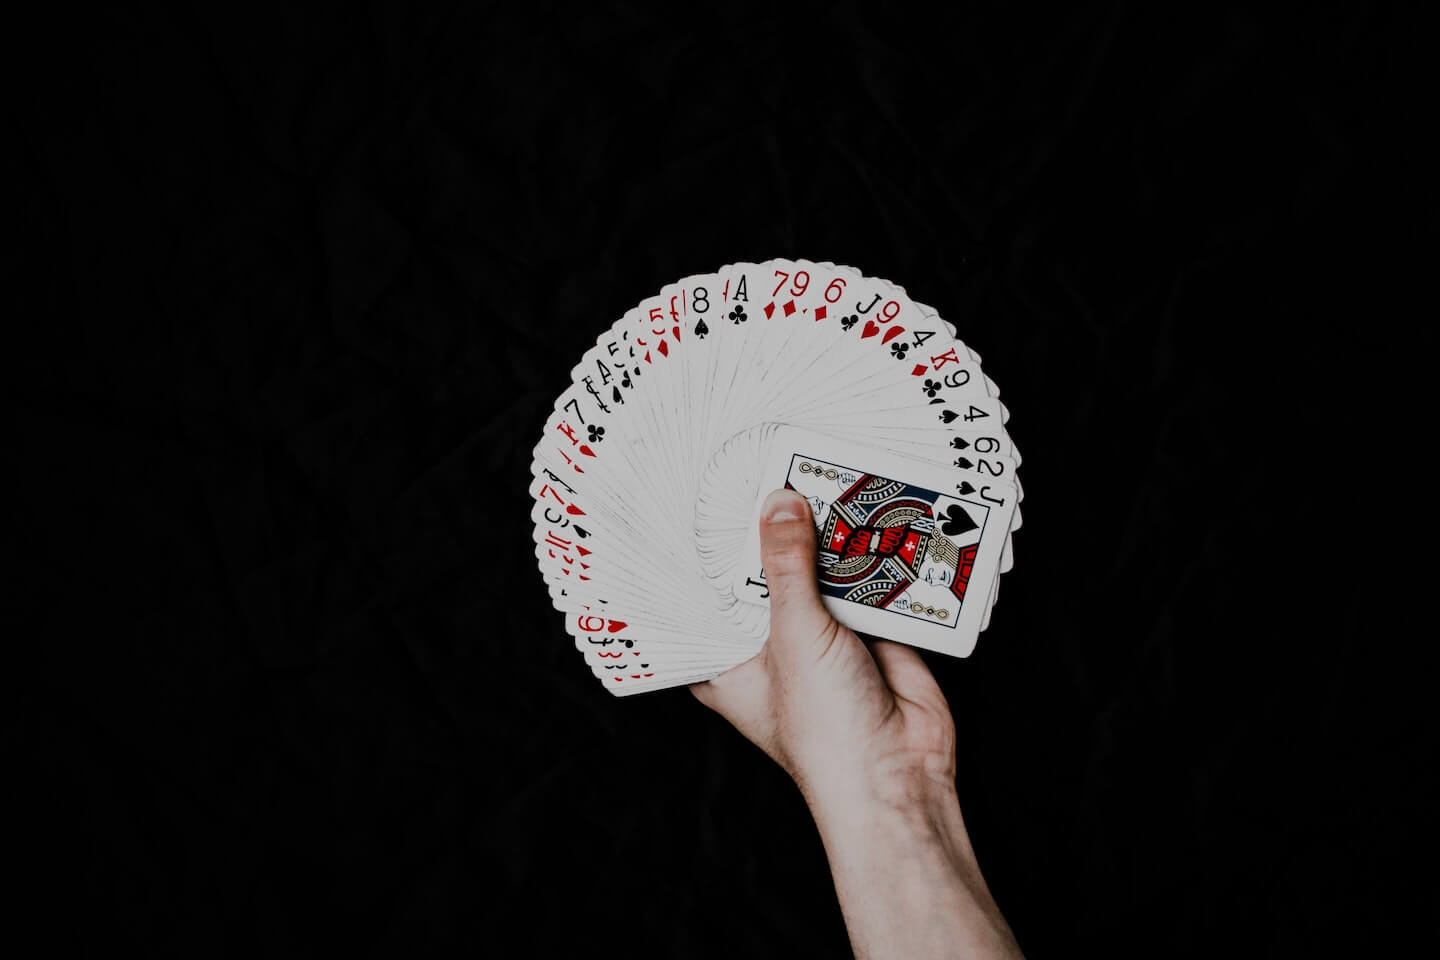 Hire a Magician for your event